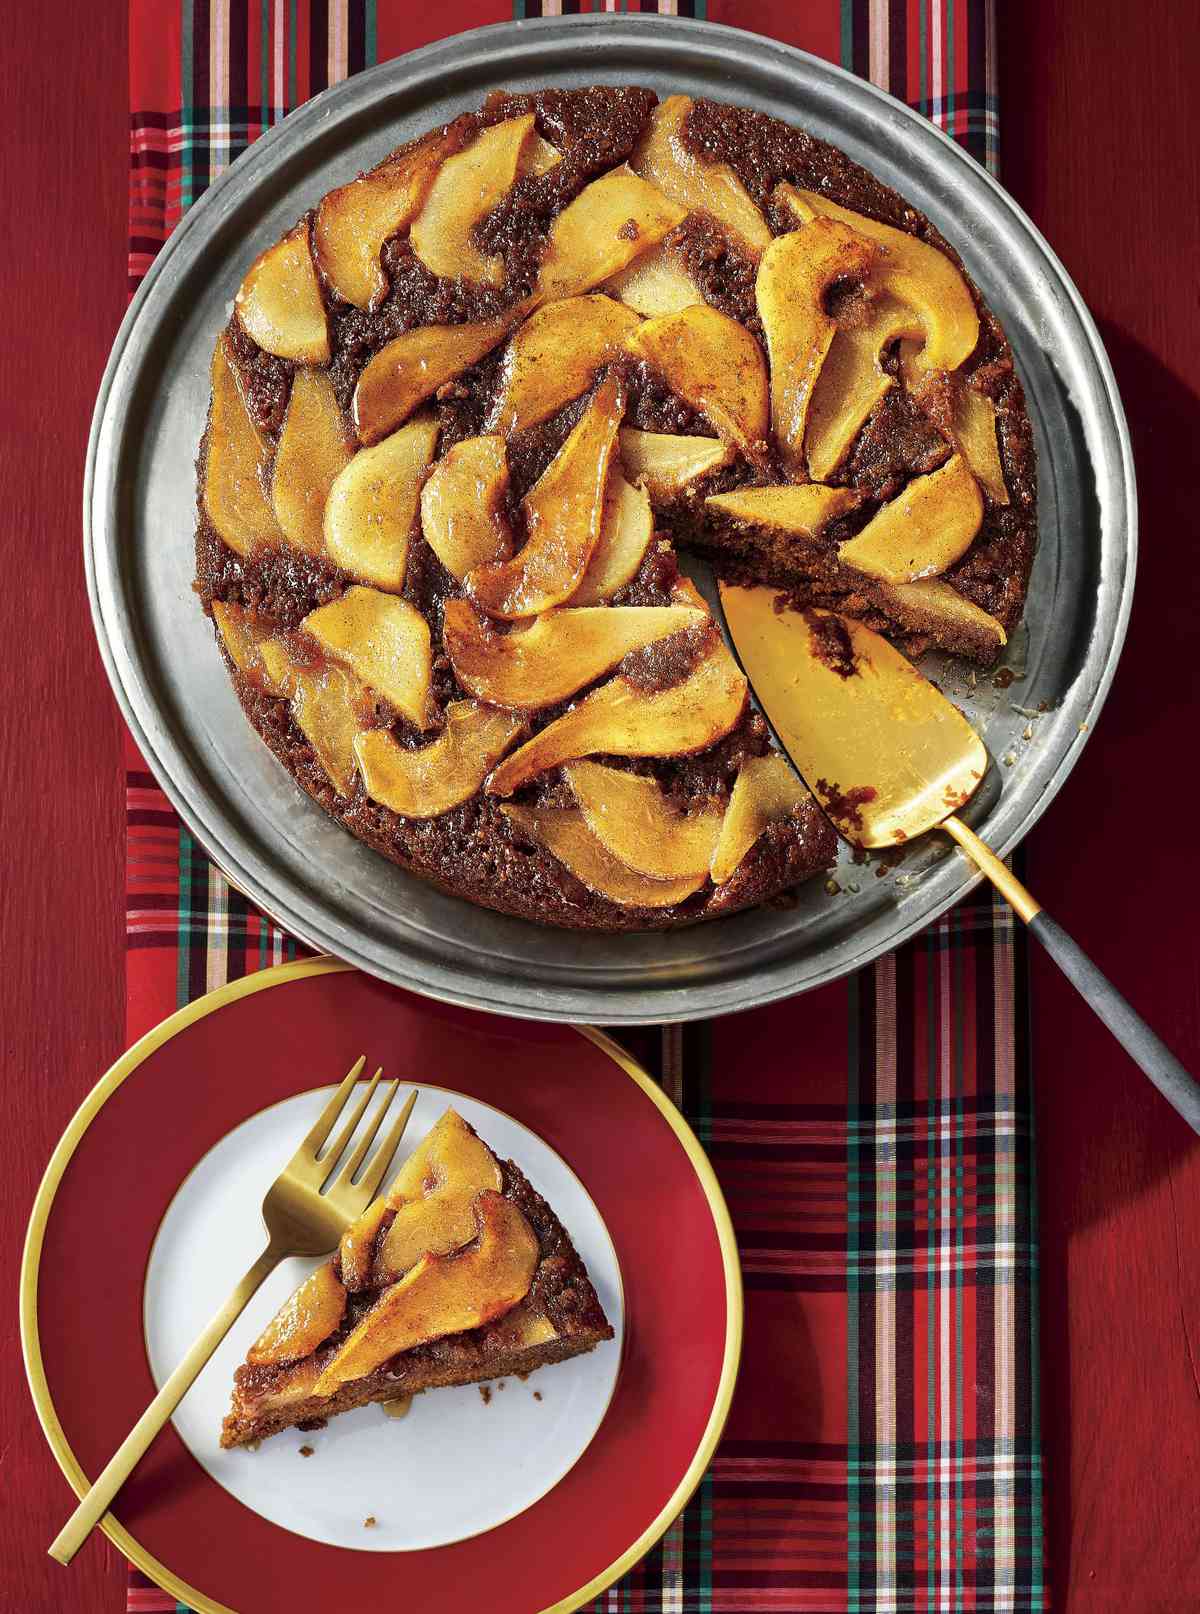 Gingerbread-and-Pear Upside-Down Cake